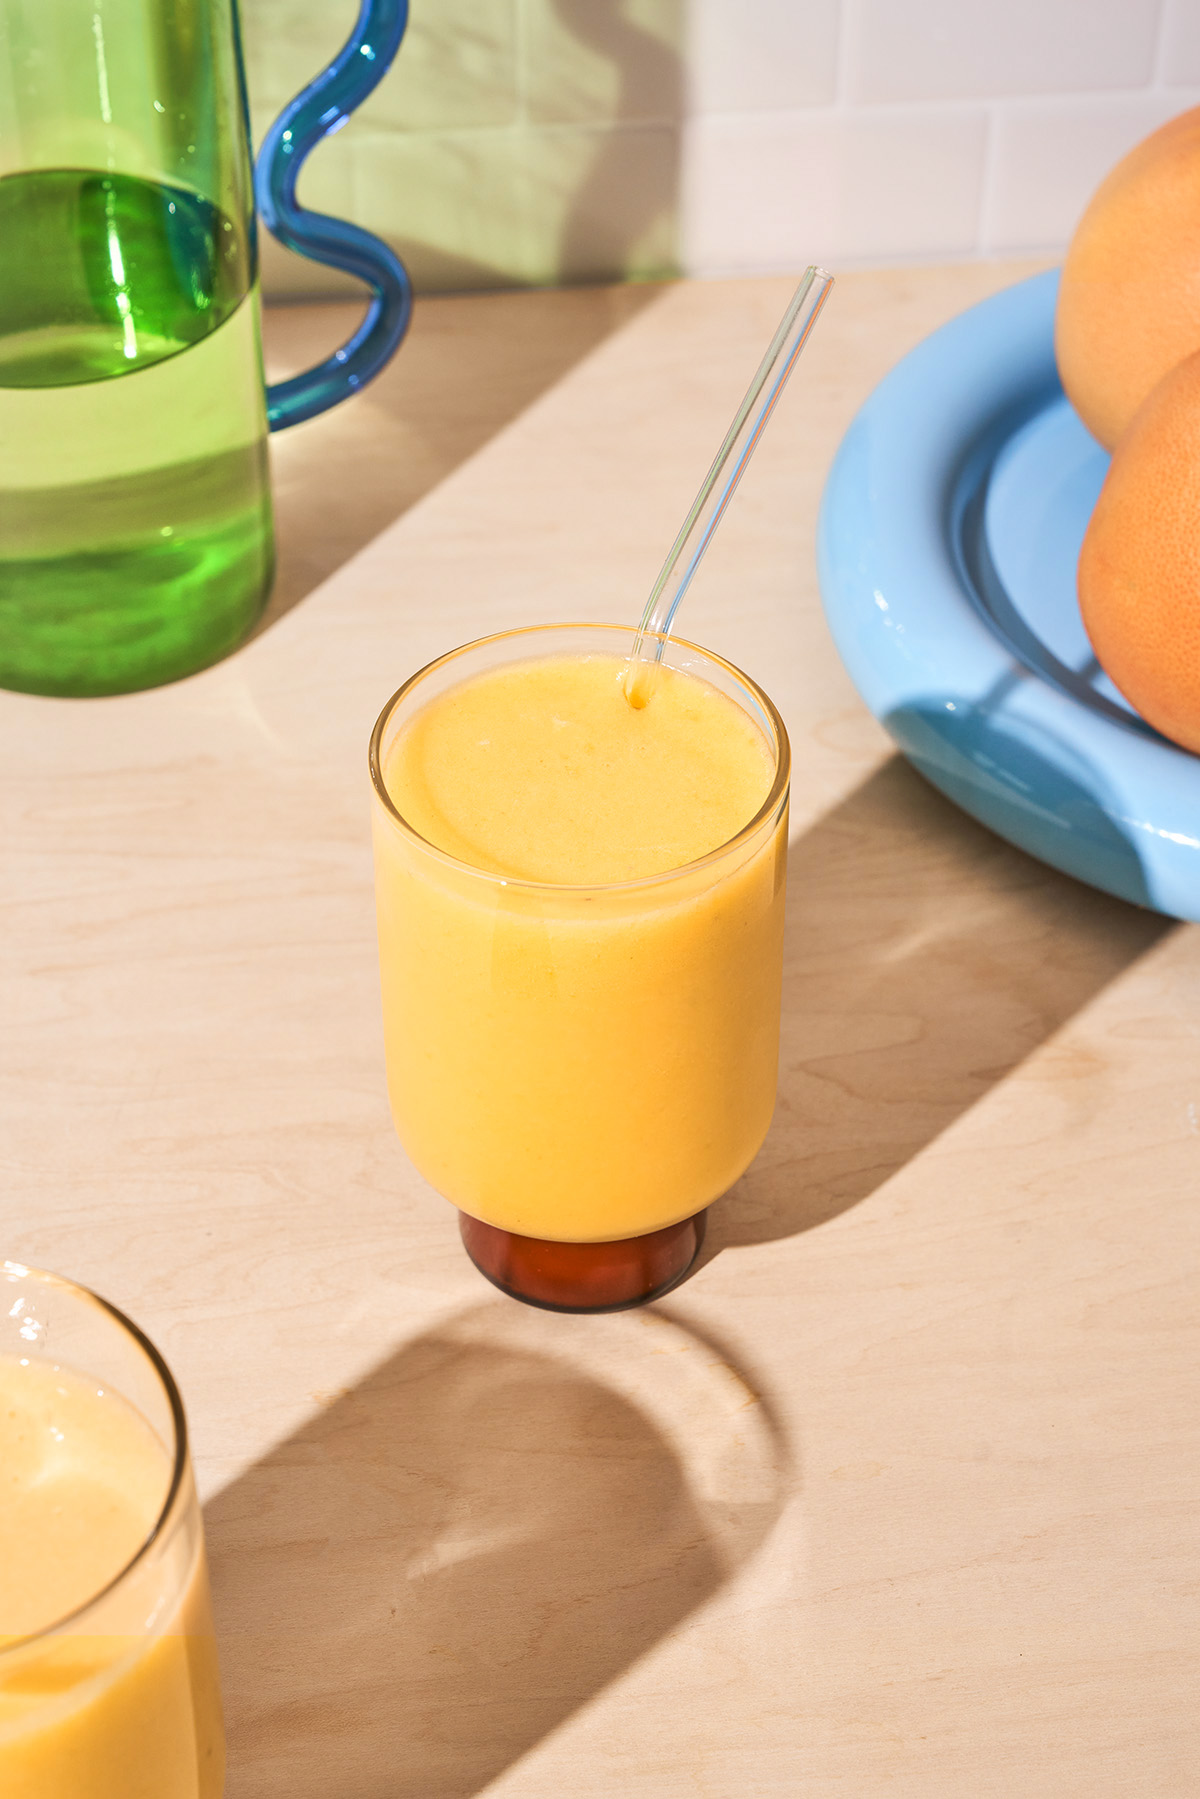 An orange smoothie in a glass with a glass straw on a kitchen countertop.